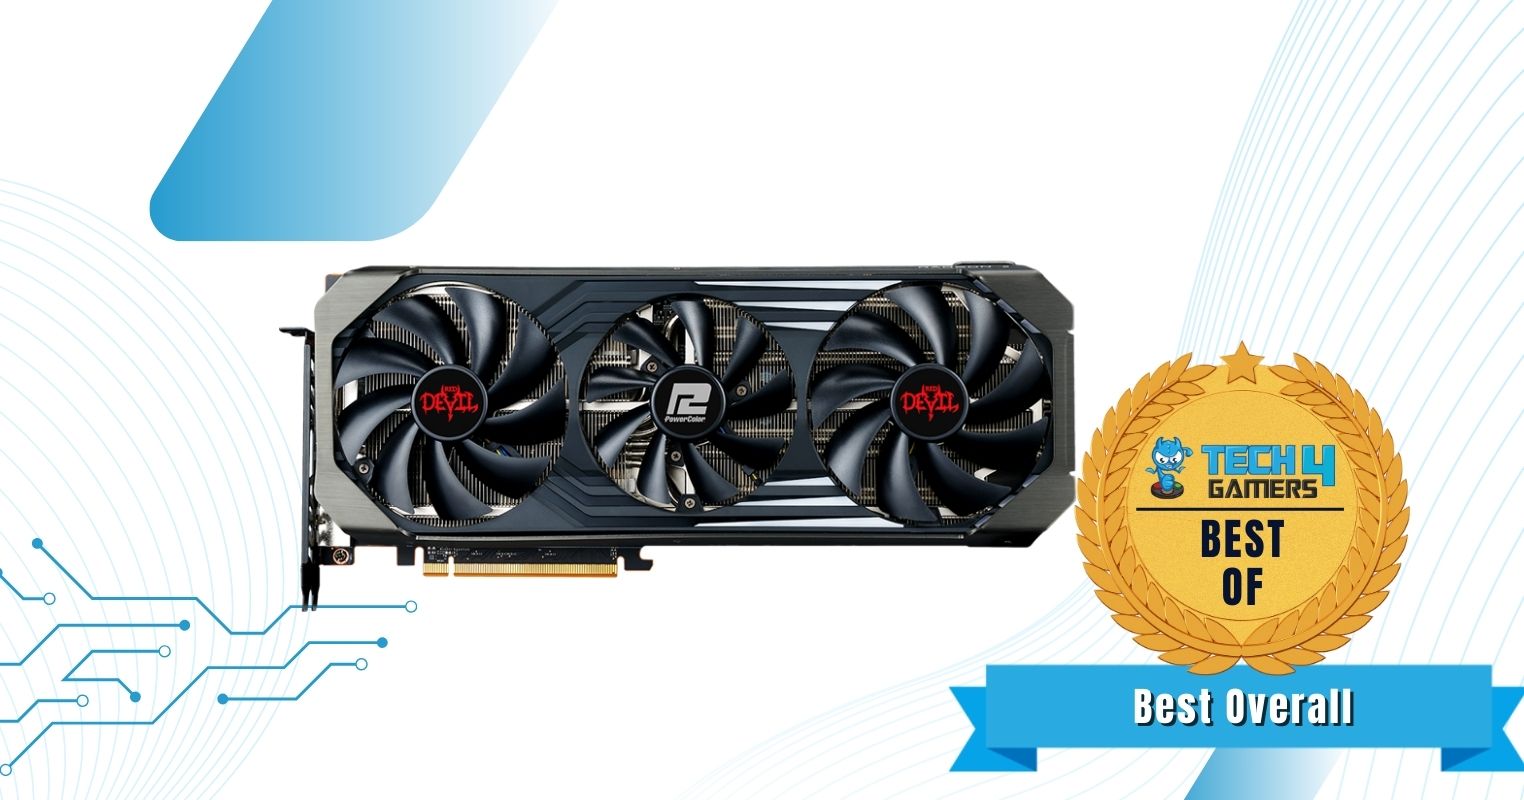 PowerColor Red Devil AMD Radeon RX 6700 XT Gaming - Best Overall Radeon RX 6700 XT